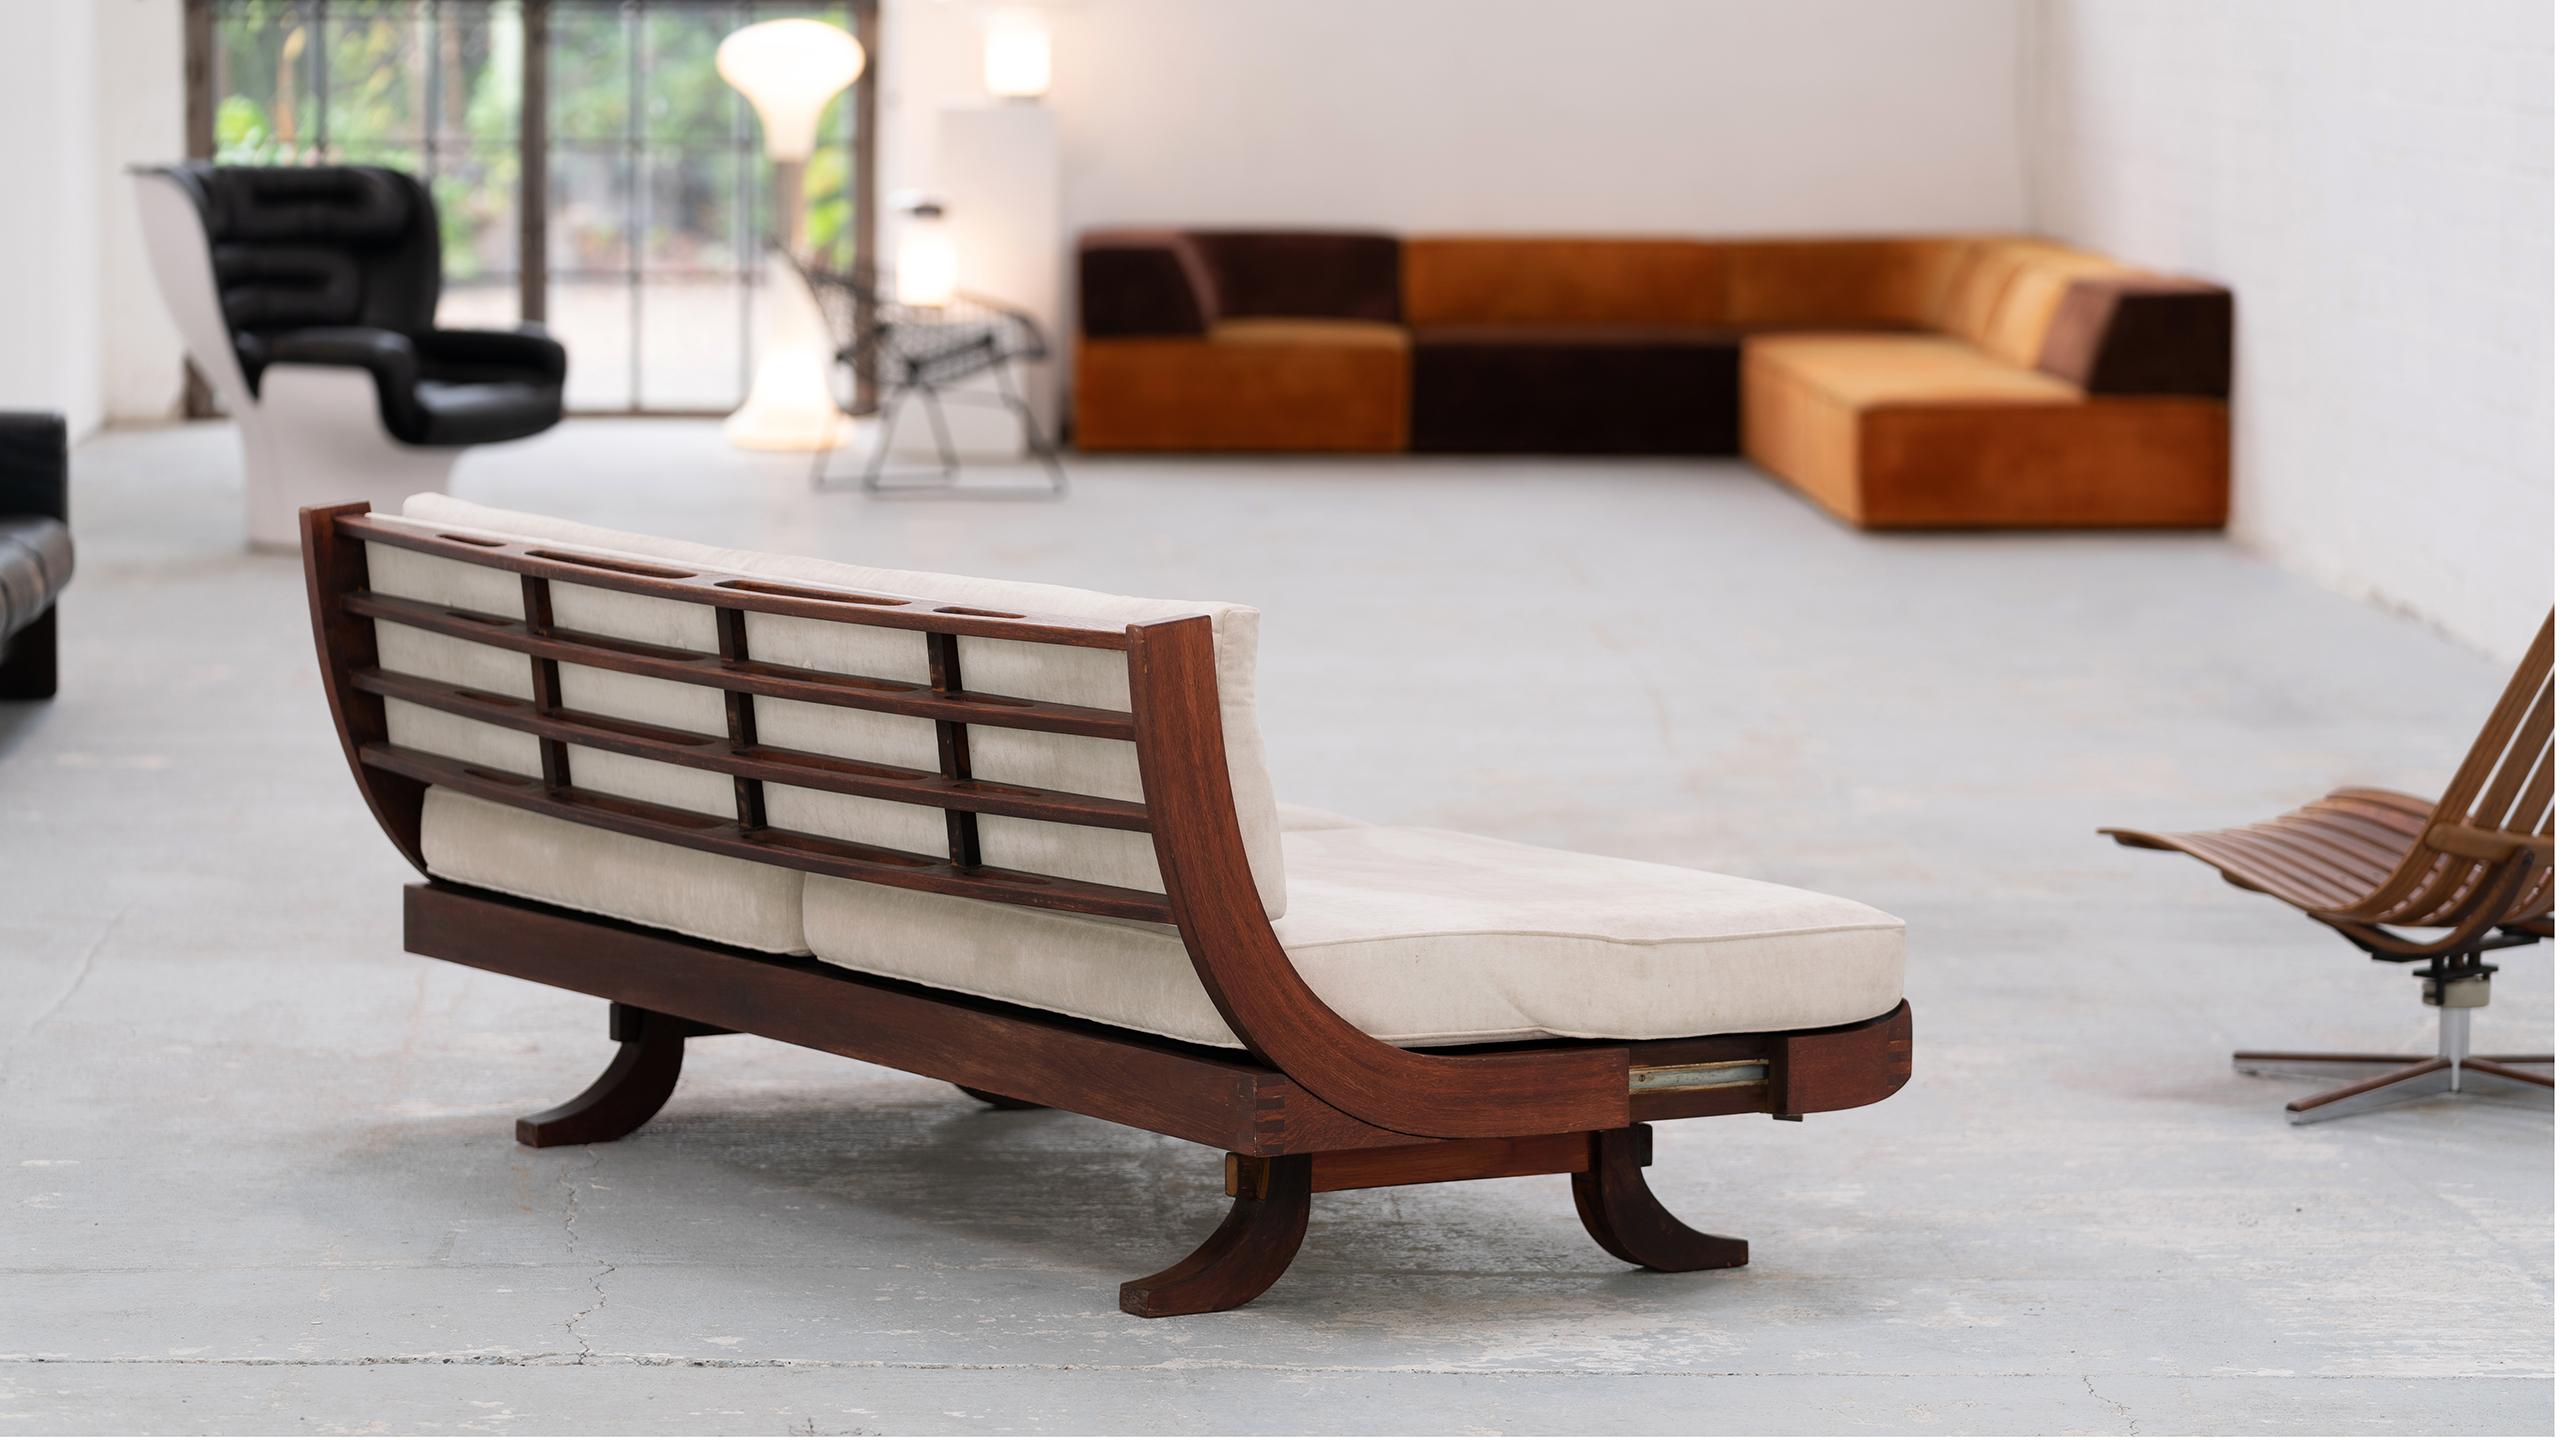 Here you have the opportunity to purchase a convertible daybed with incredibly sophisticated wood details on the backrest. 

Get an impression from the photos, the backrest can be pulled back to give the seat more depth, so the sofa becomes a